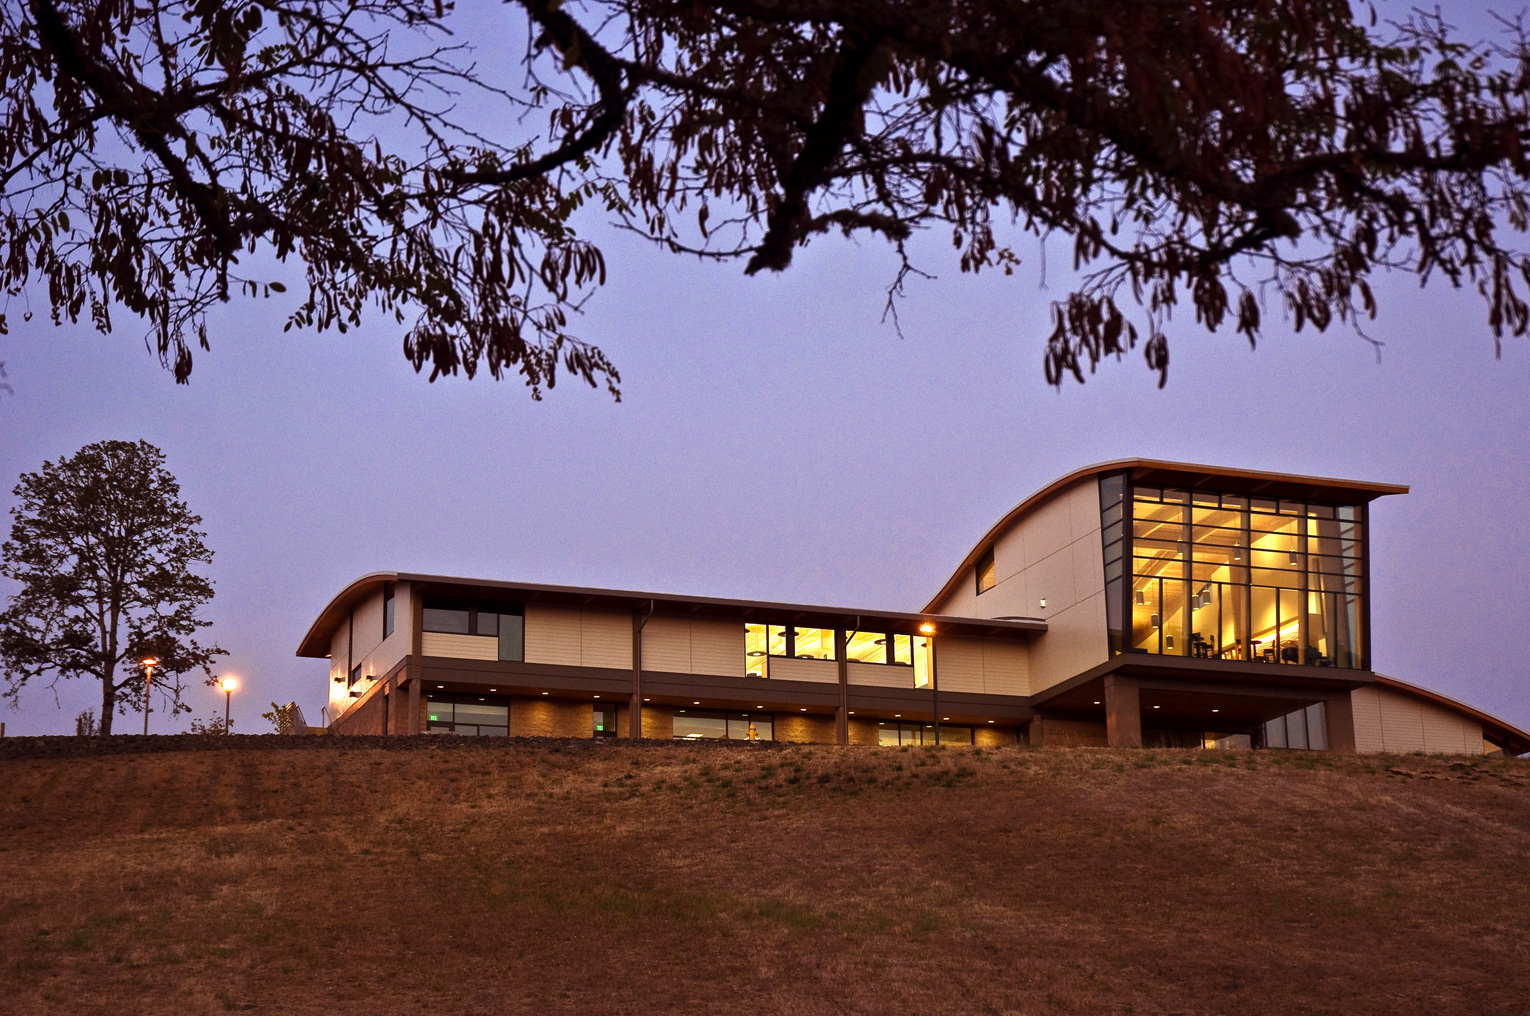 Umpqua Community College Danny Lang Center. Perched high on a hill and captured at dusk, this image shows a long, narrow winery and teaching building with a rounded roof. Portruding from the body of the building is a double-story tasting room which is lit from within.